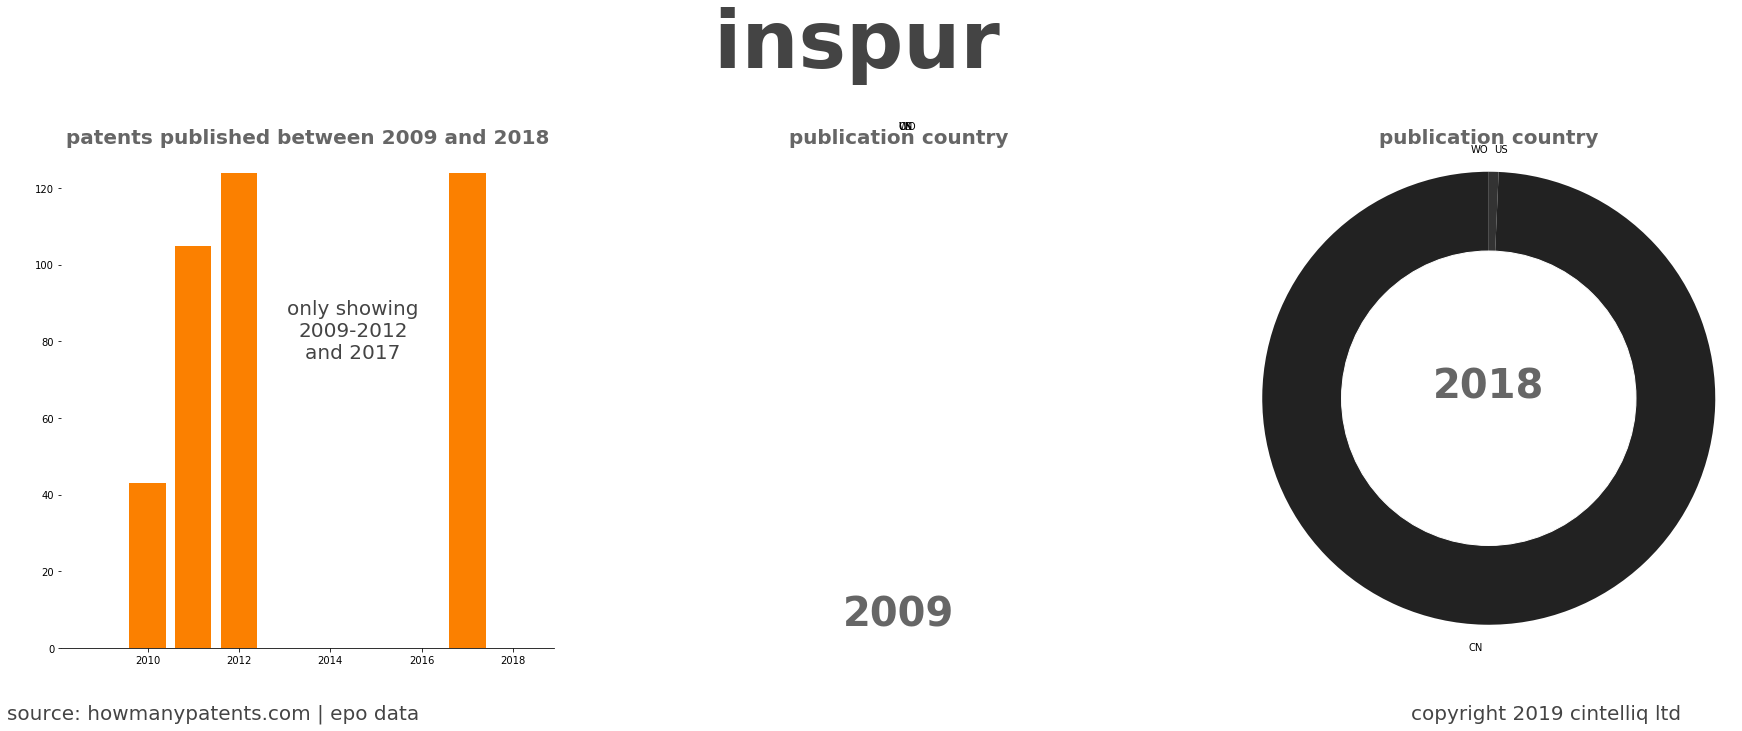 summary of patents for Inspur 